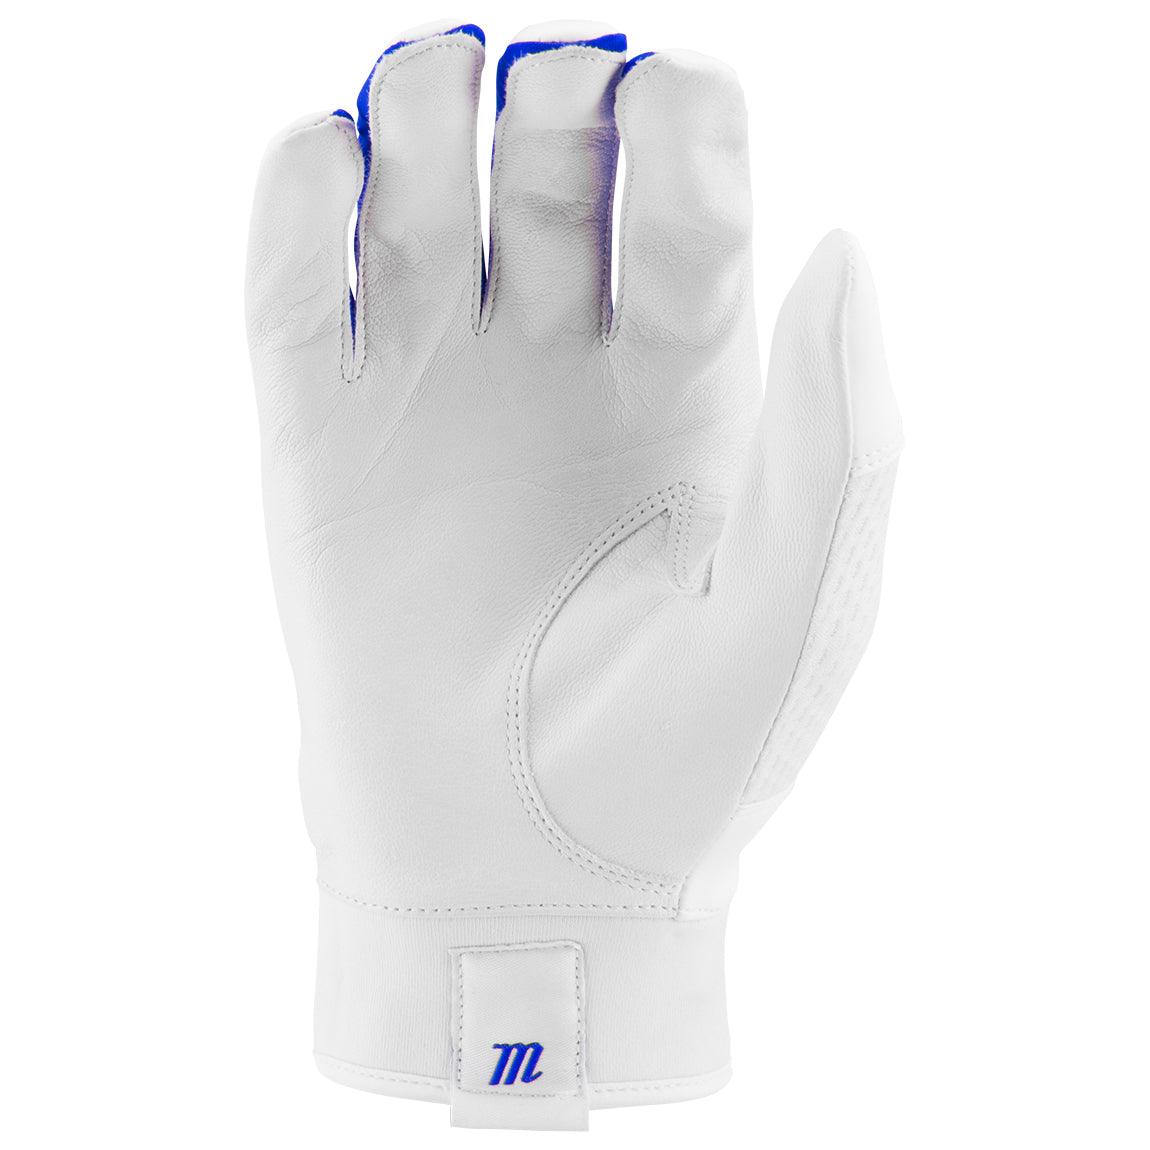 Quest 2.0 Batting Gloves - Sports Excellence